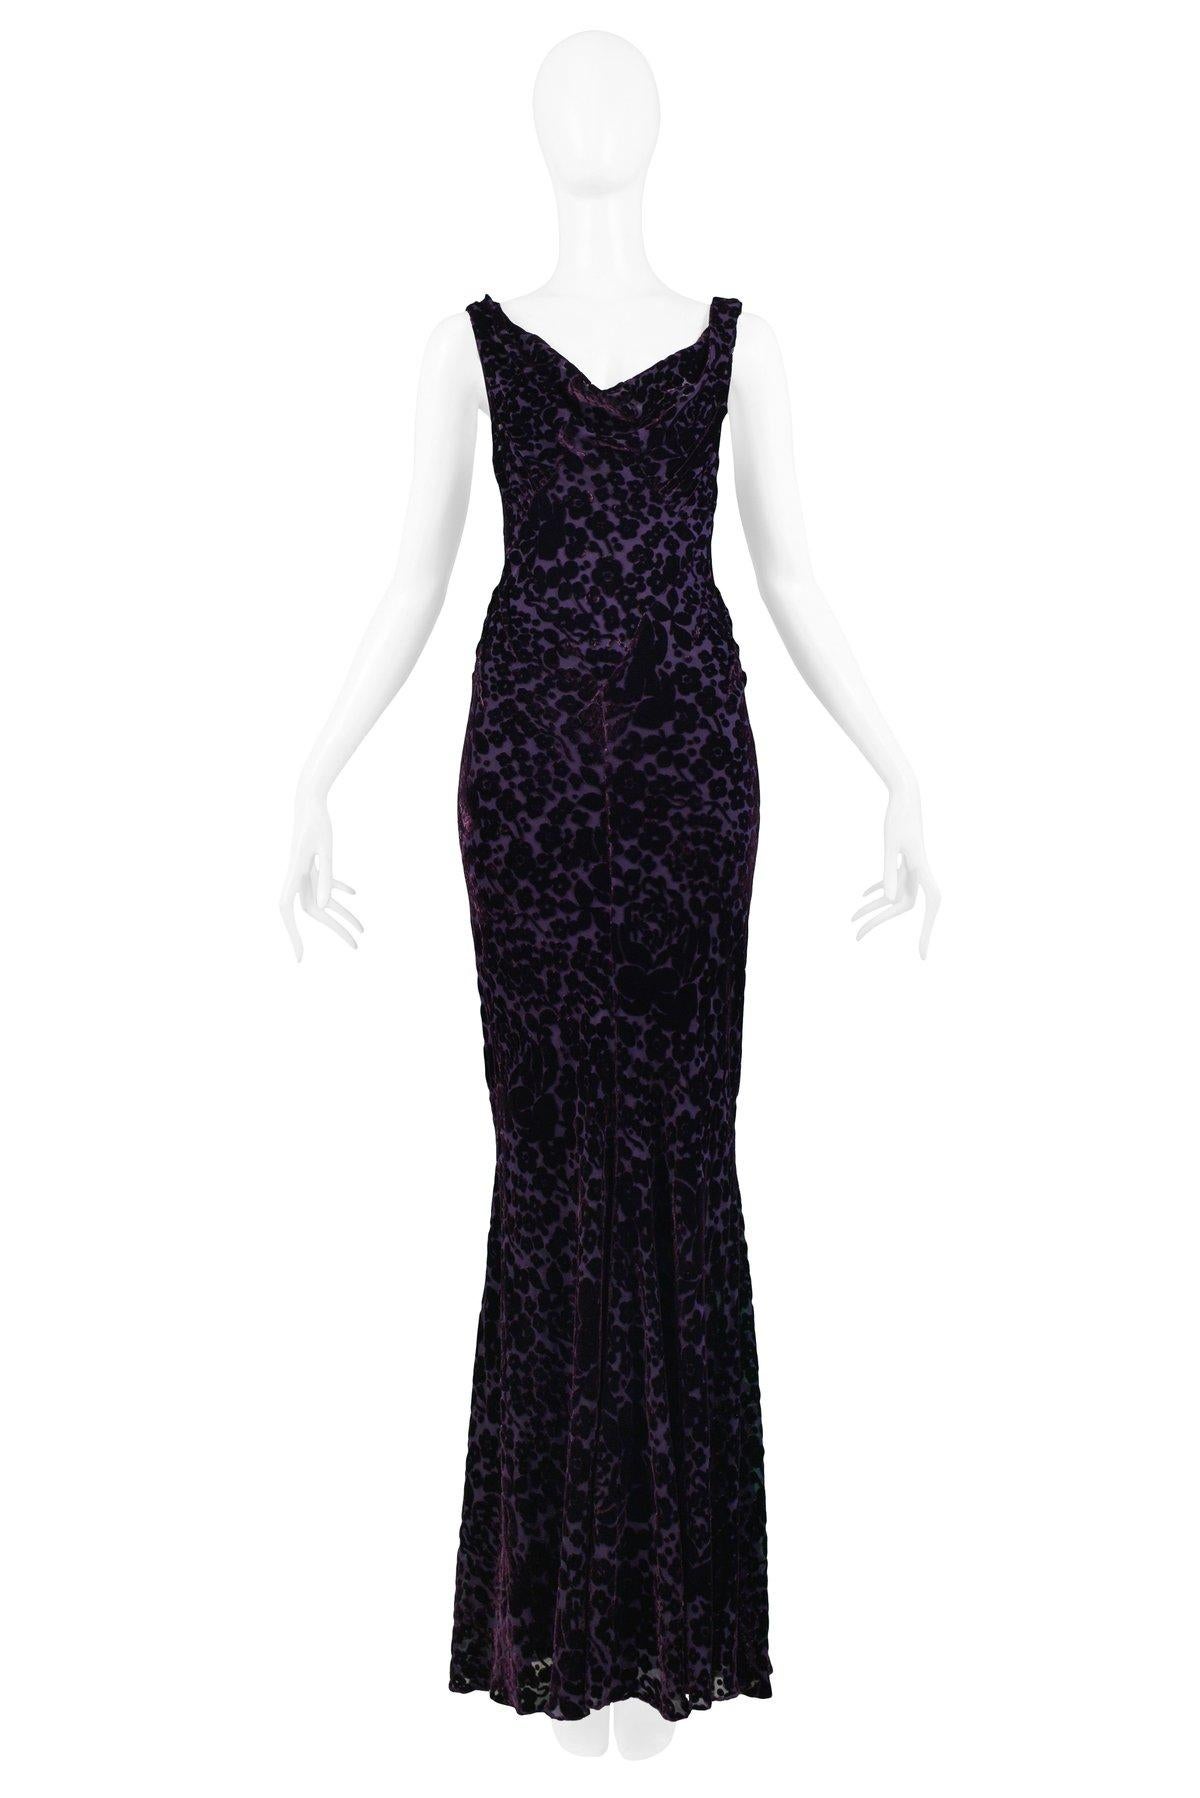 Resurrection is pleased to offer this vintage John Galliano deep purple floral Devore velvet bias cut gown featuring a draped V- neckline, slightly flared skirt, and self-faced buttons at side closure.

John Galliano 
Size 44
Measurements: (Measured